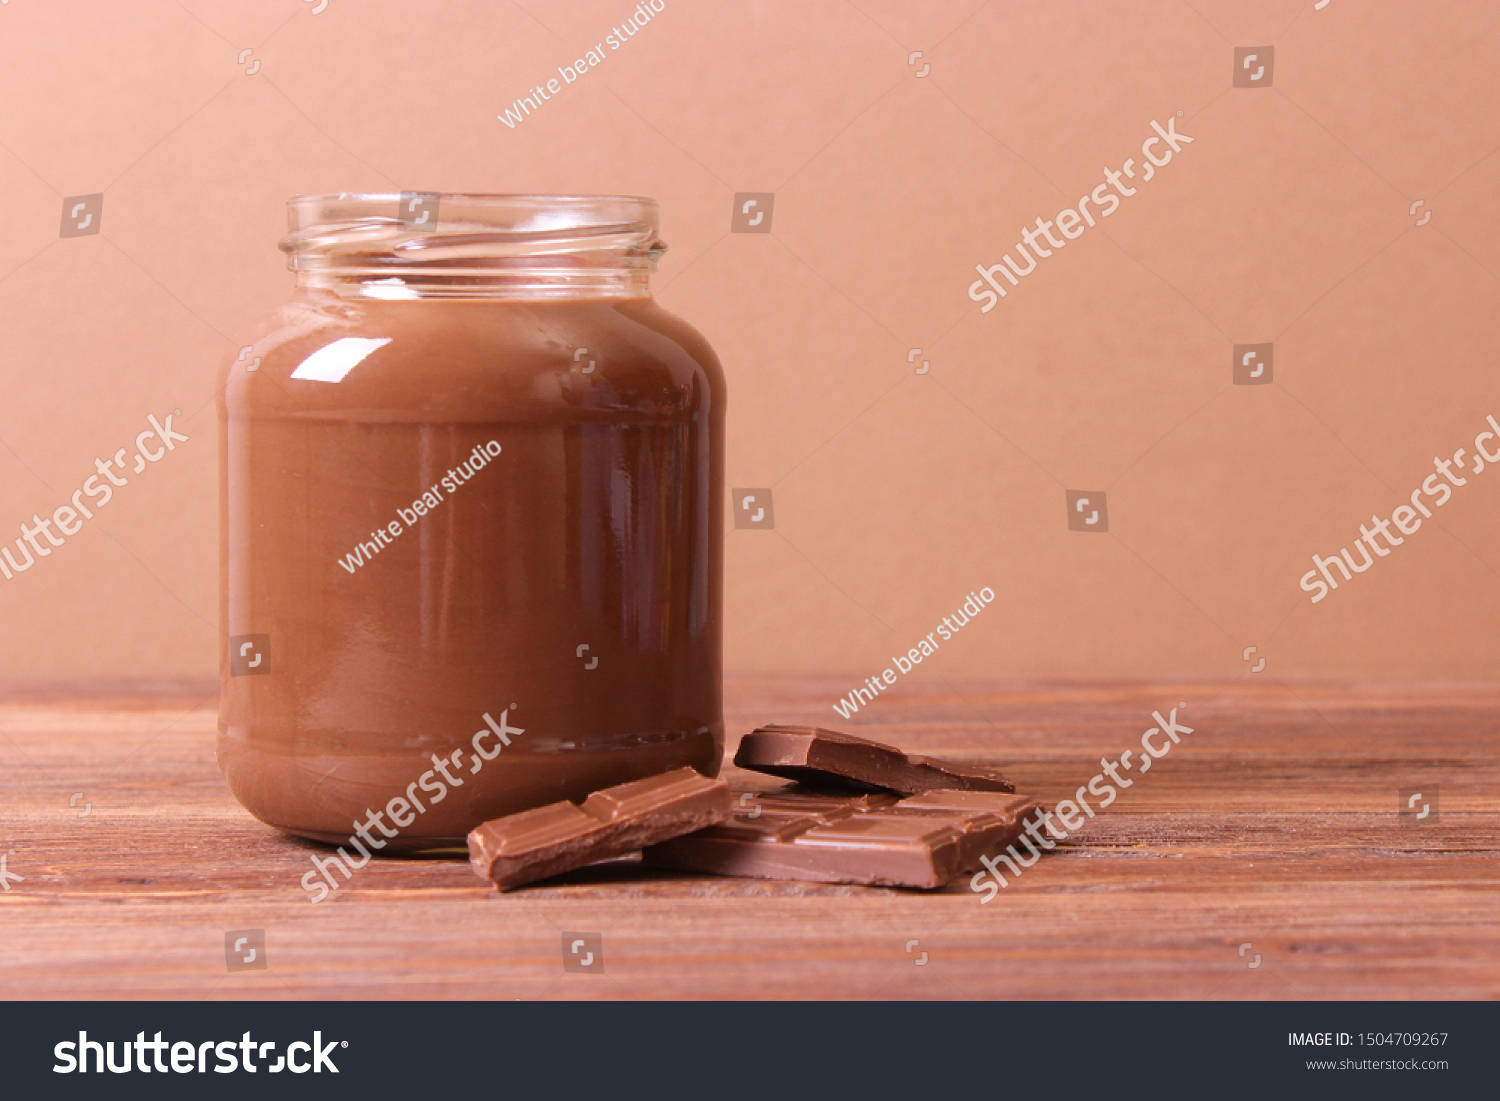 Chocolate Paste Glass Jar On Colored Stock Photo Edit Now 1504709267